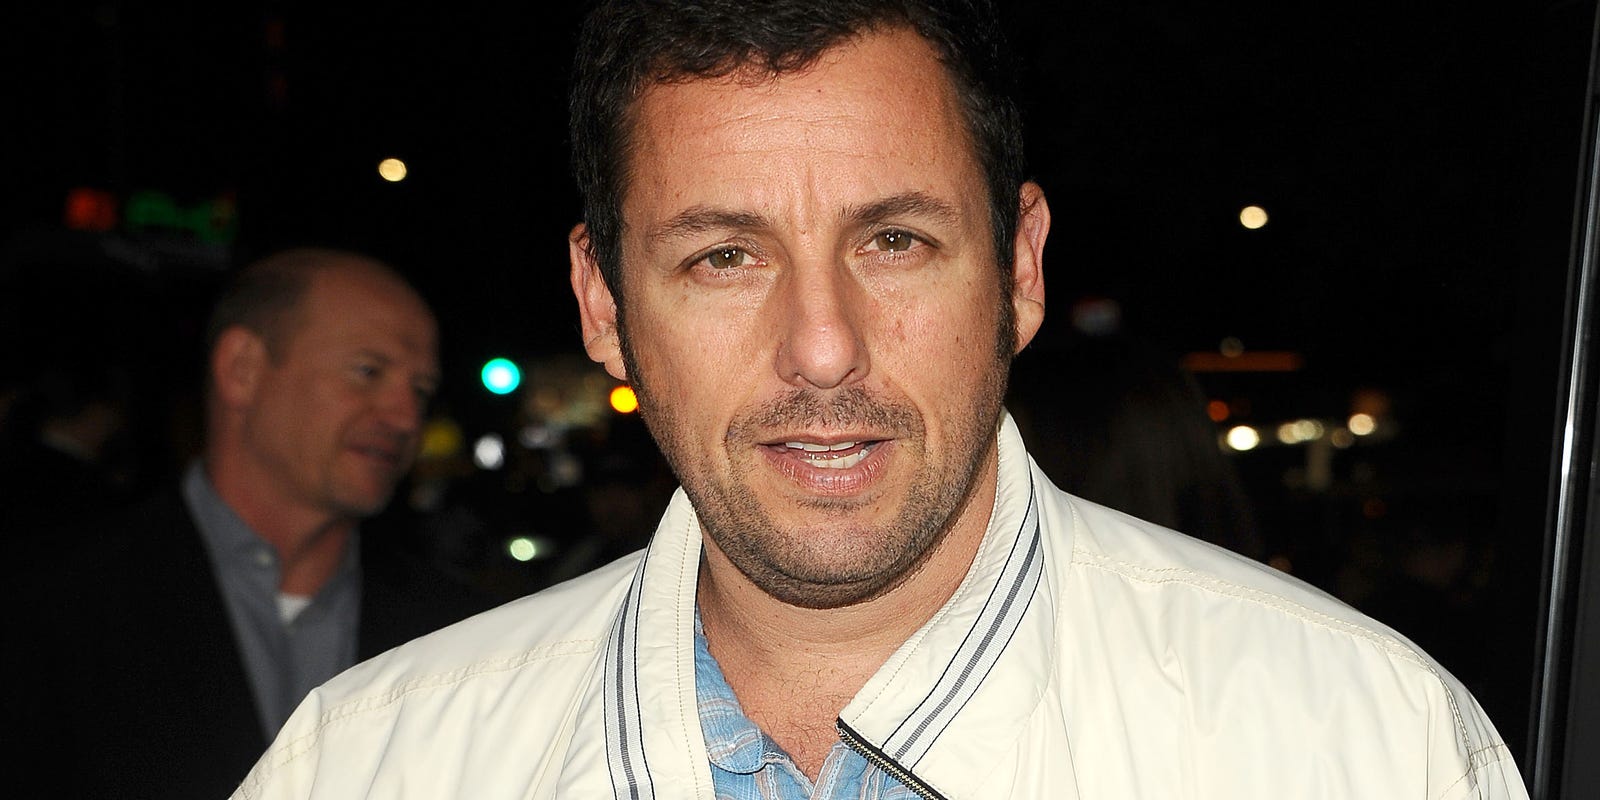 Adam Sandler is bringing his 100 Percent Fresher Tour to Buffalo